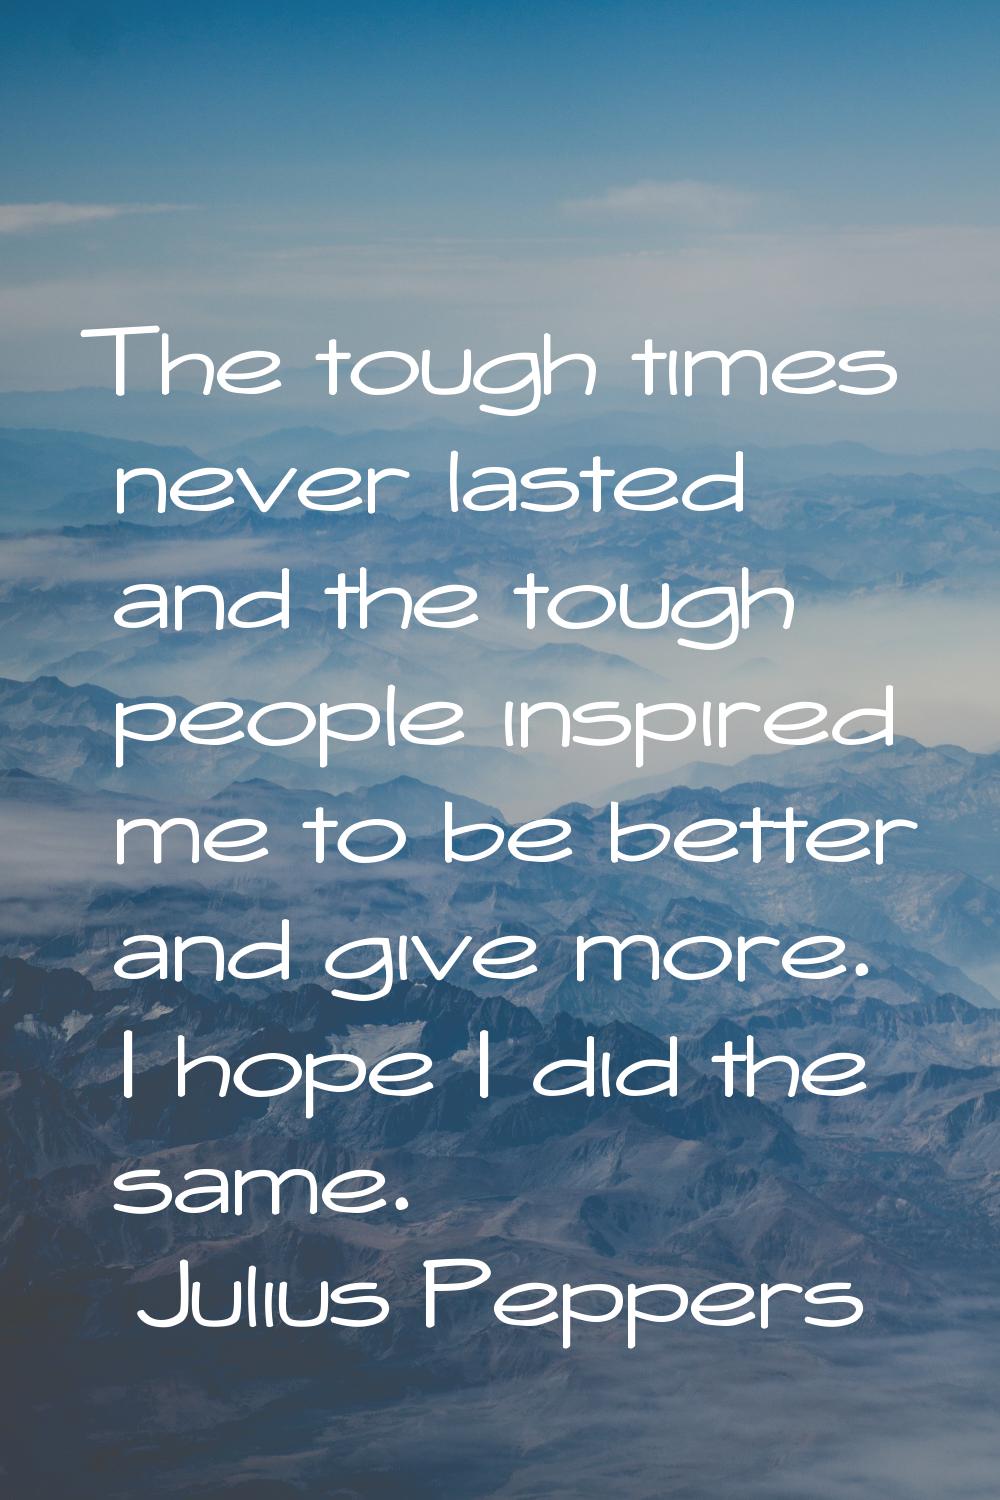 The tough times never lasted and the tough people inspired me to be better and give more. I hope I 